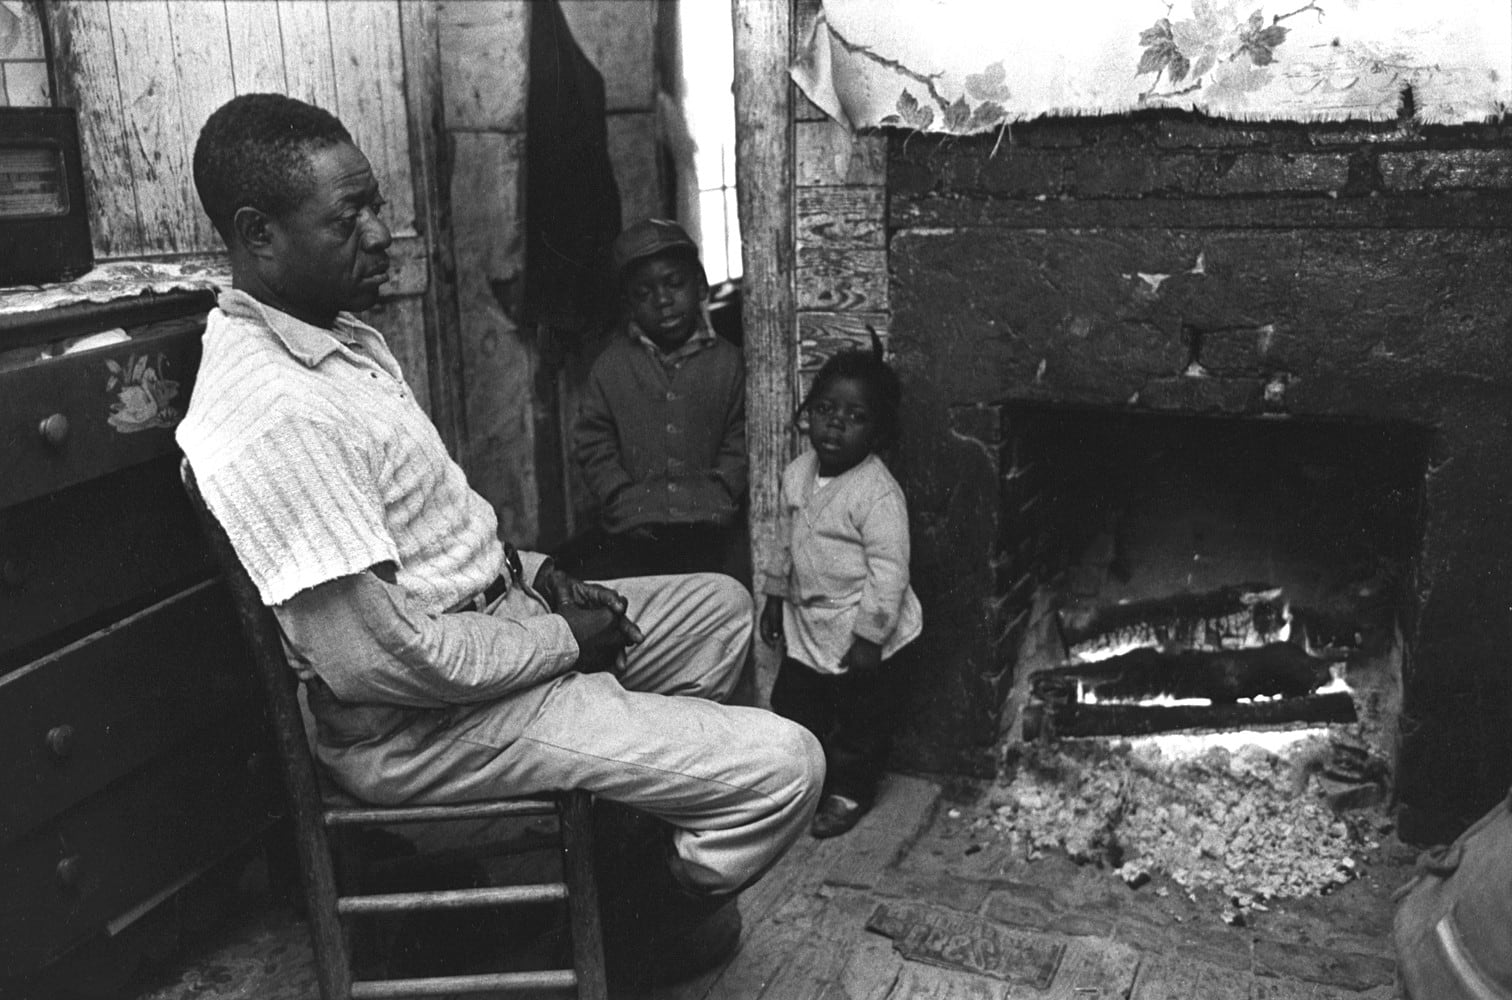 Constantine Manos, Untitled, Sharecroppers, South Carolina (man and 2 children near fireplace), 1965